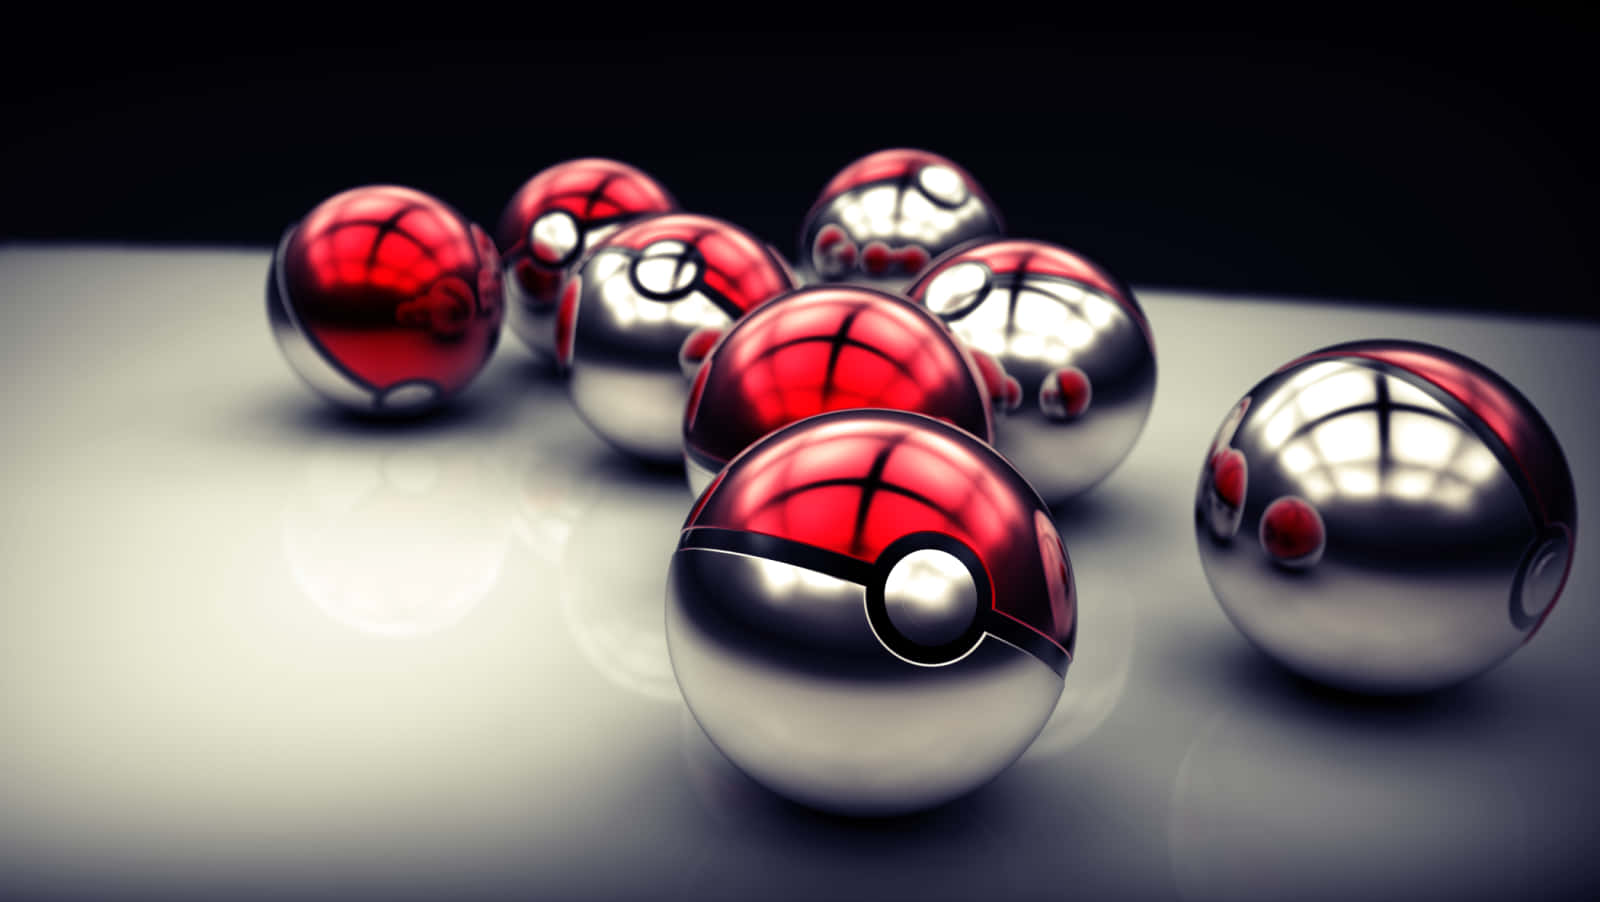 Pokemon Spheres In A Row On A White Surface